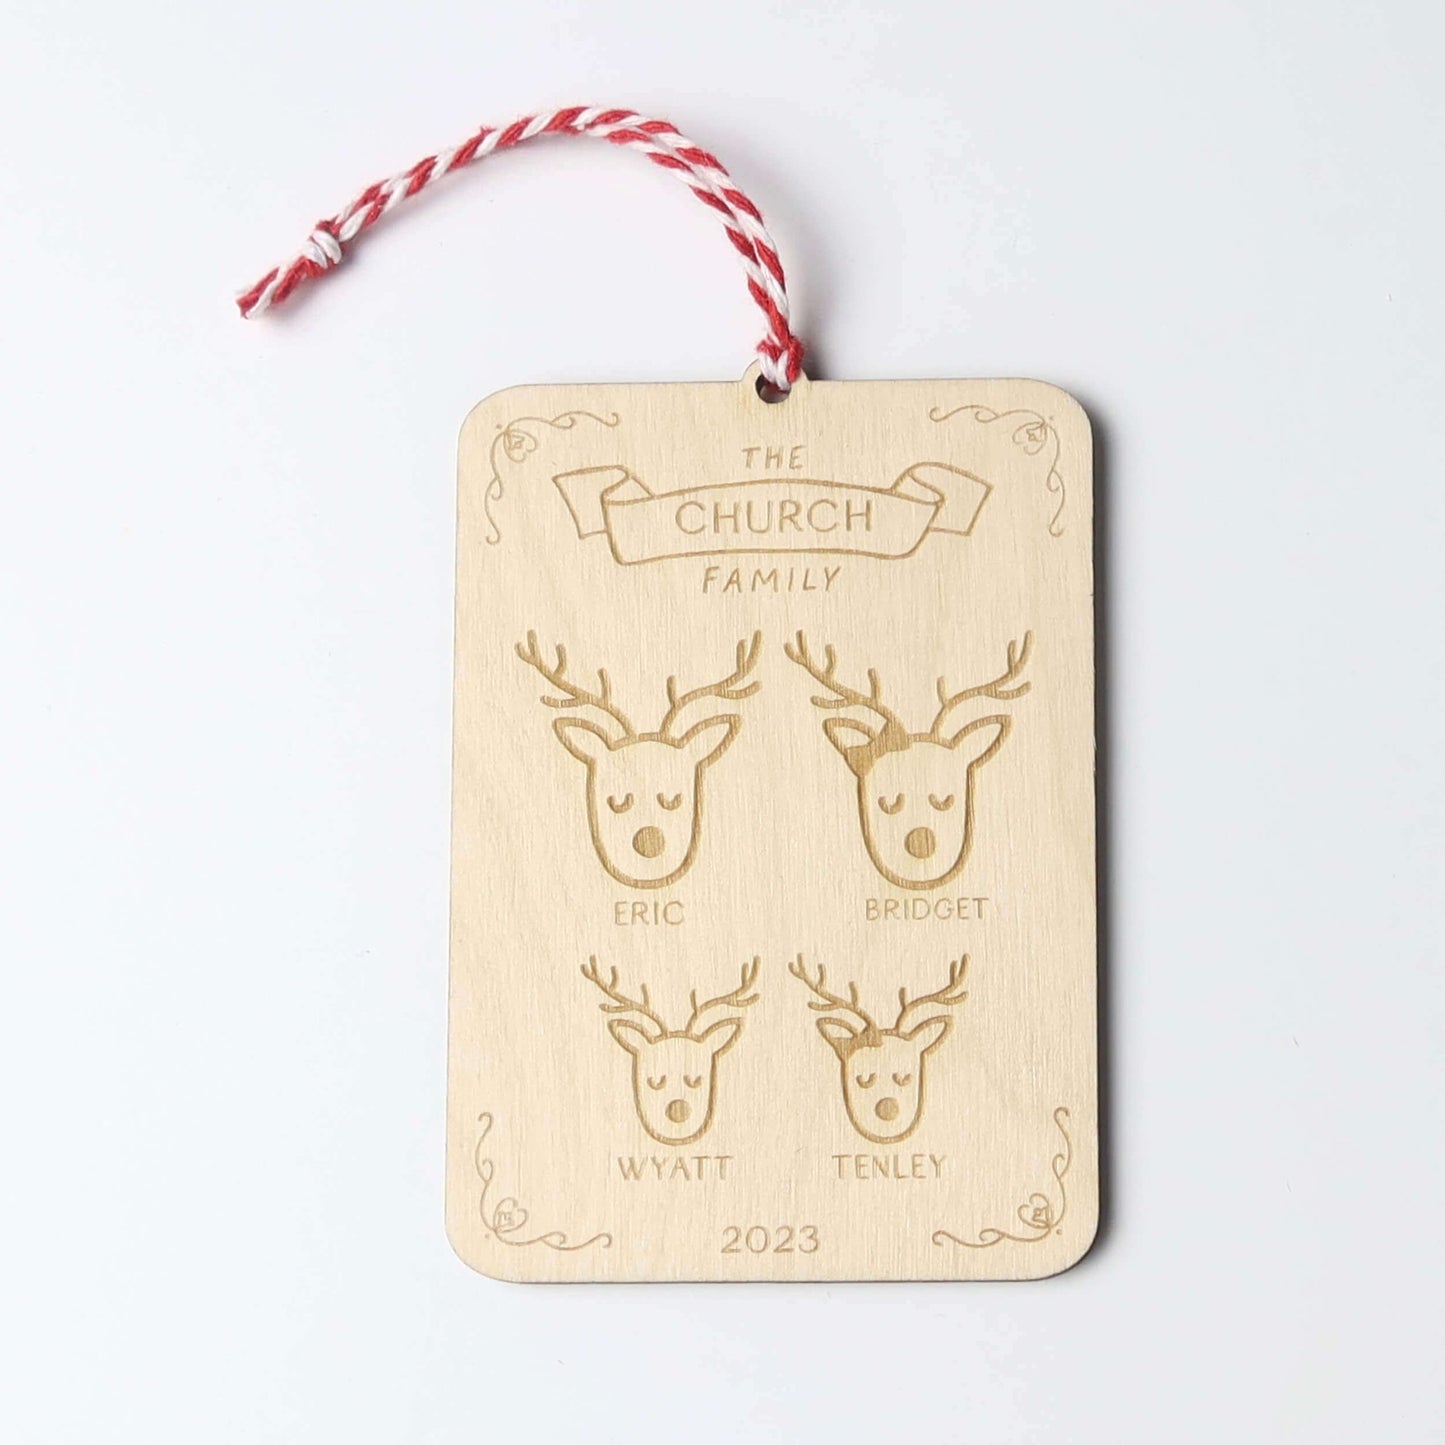 Reindeer Family Personalized Christmas Ornament - Holiday Ornaments - Moon Rock Prints